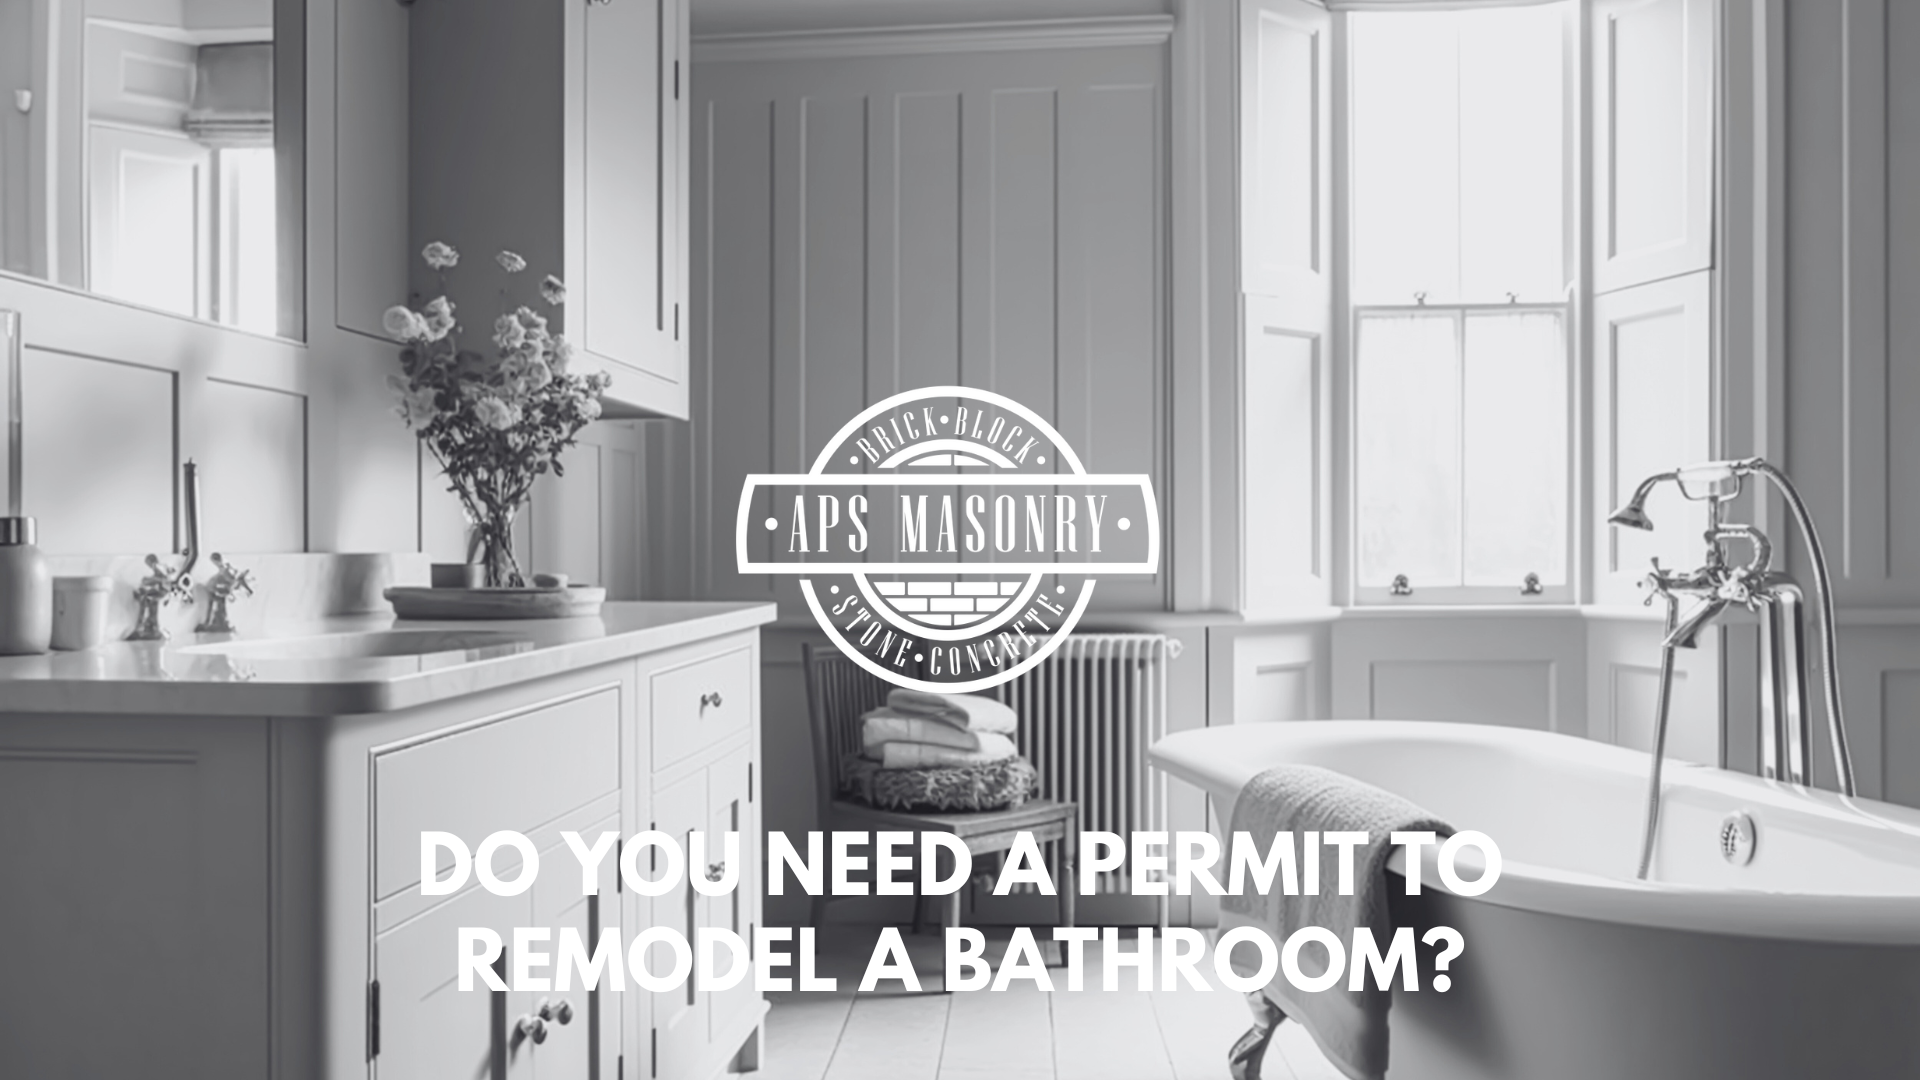 Do You Need A Permit to Remodel A Bathroom?